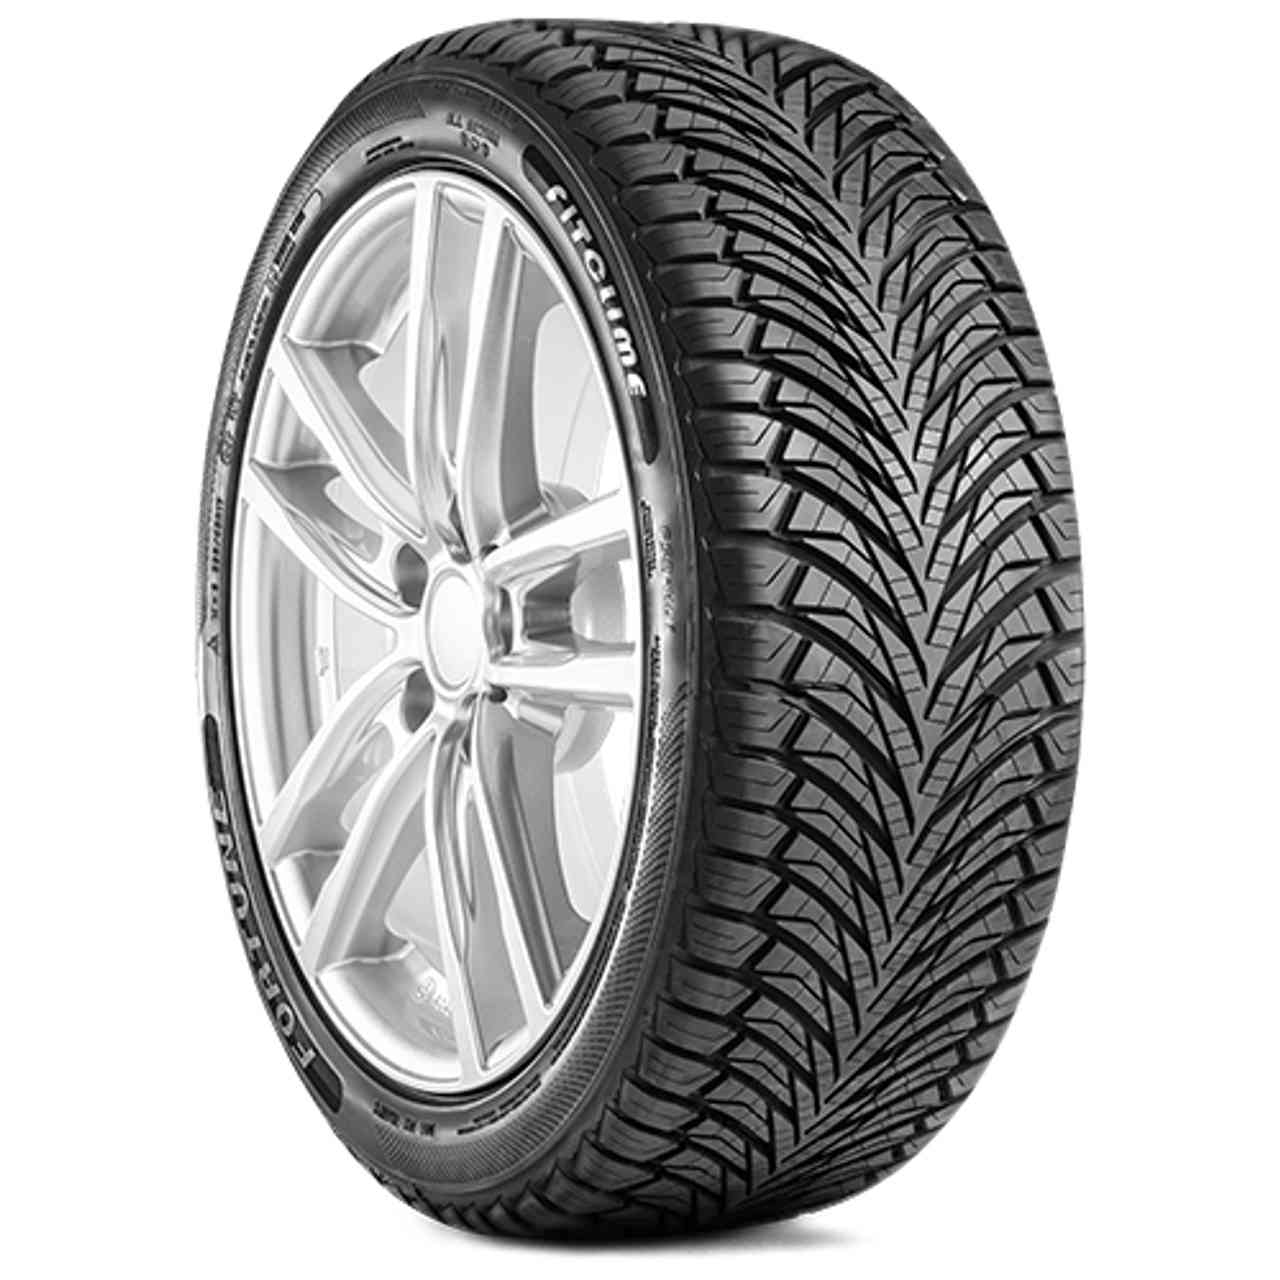 FORTUNE FITCLIME FSR-401 195/55R16 91V BSW